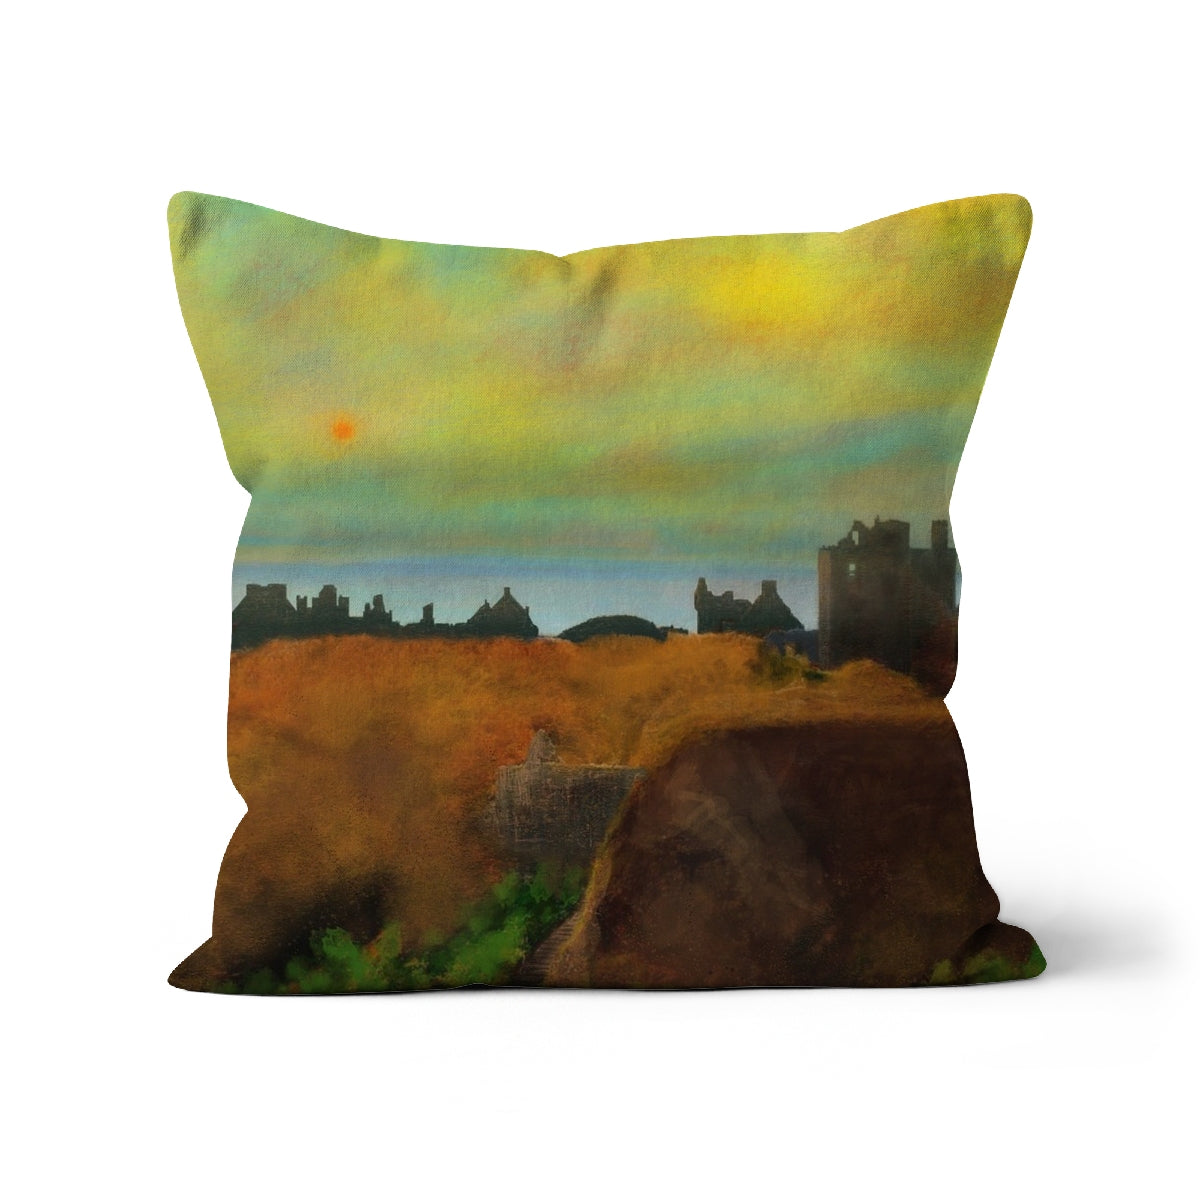 Dunnottar Castle Art Gifts Cushion-Cushions-Historic & Iconic Scotland Art Gallery-Faux Suede-22"x22"-Paintings, Prints, Homeware, Art Gifts From Scotland By Scottish Artist Kevin Hunter